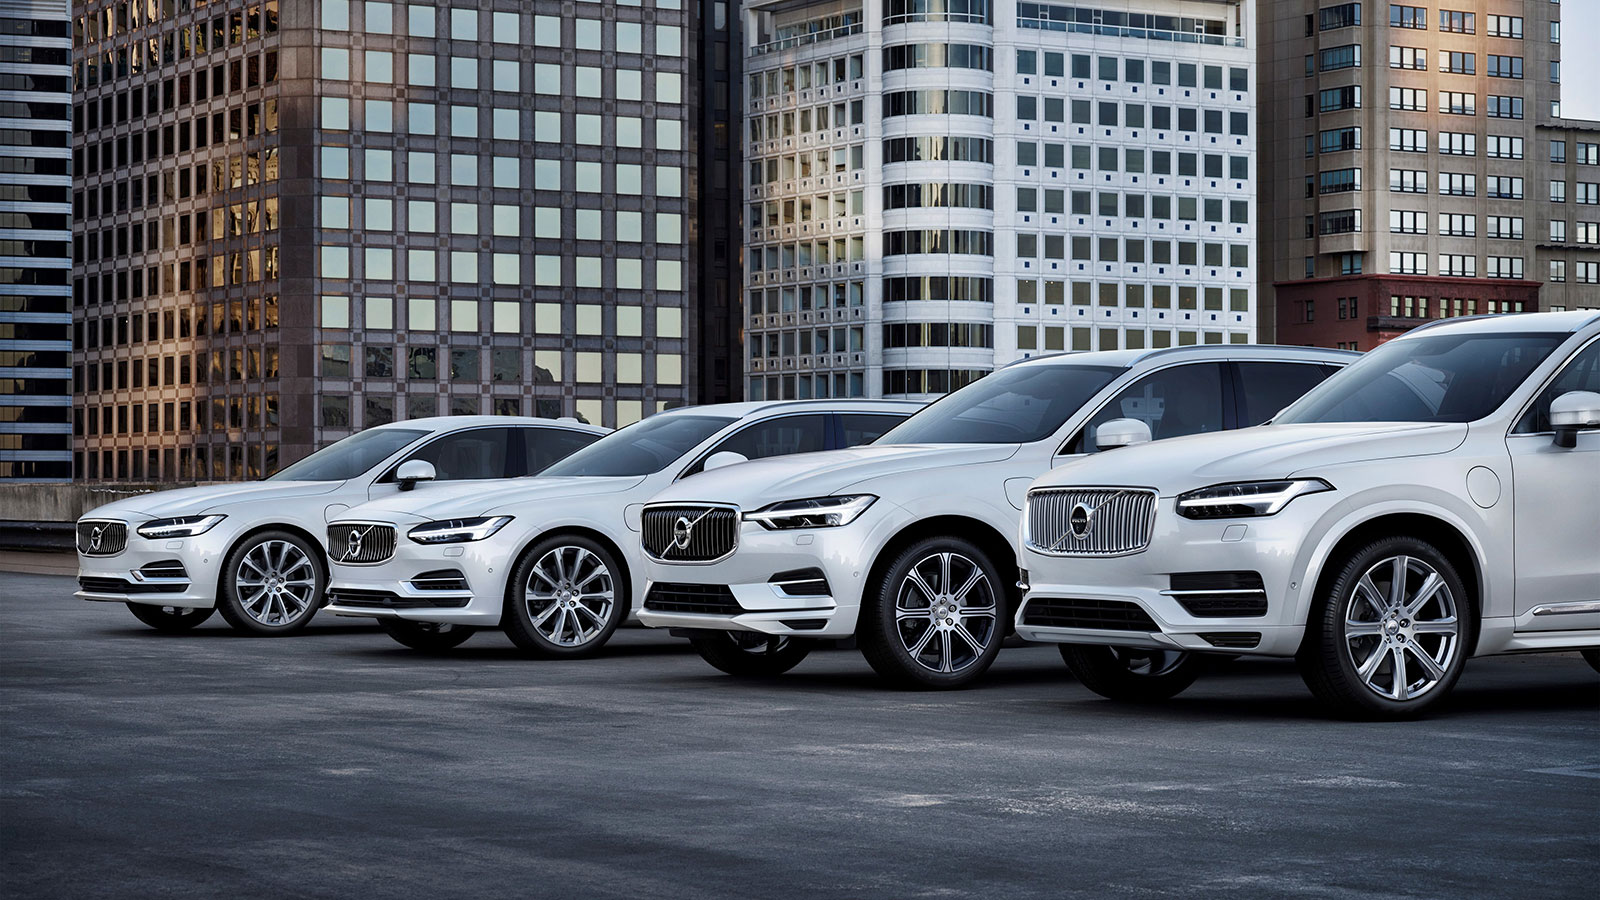 VOLVO CARS TO GO ALL ELECTRIC OR HYBRID